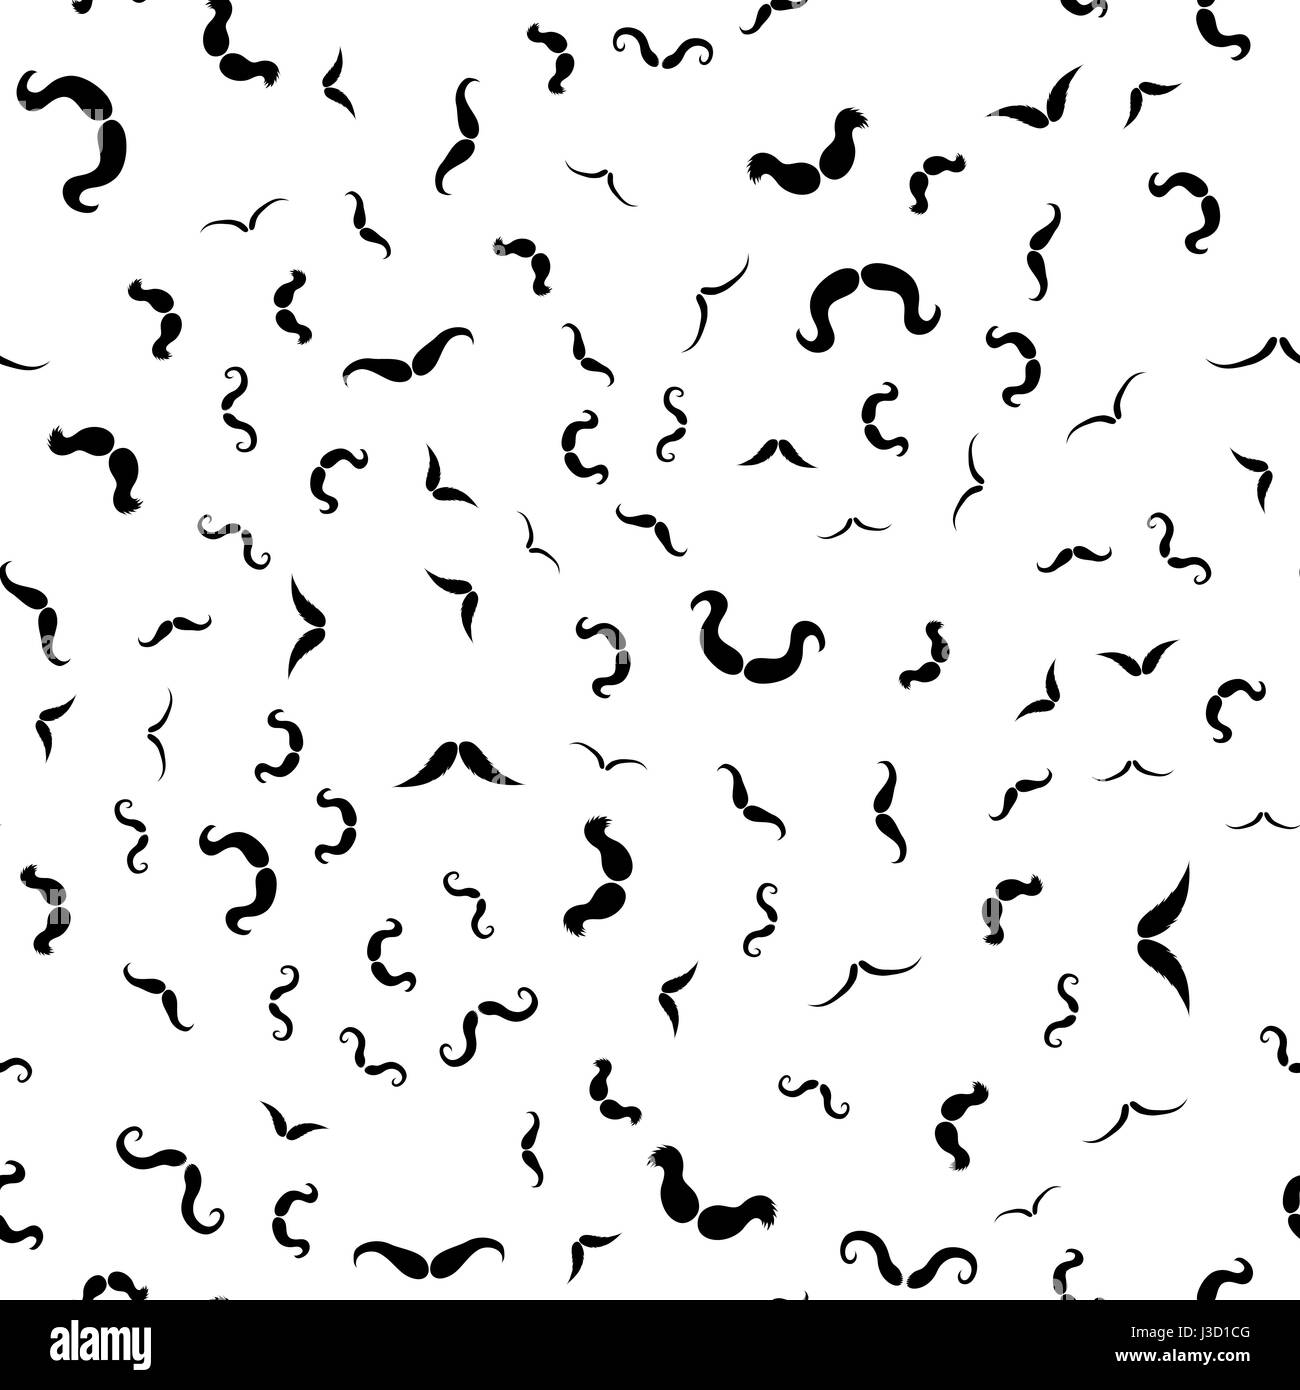 Mustache Silhouettes Seamless Pattern Stock Vector